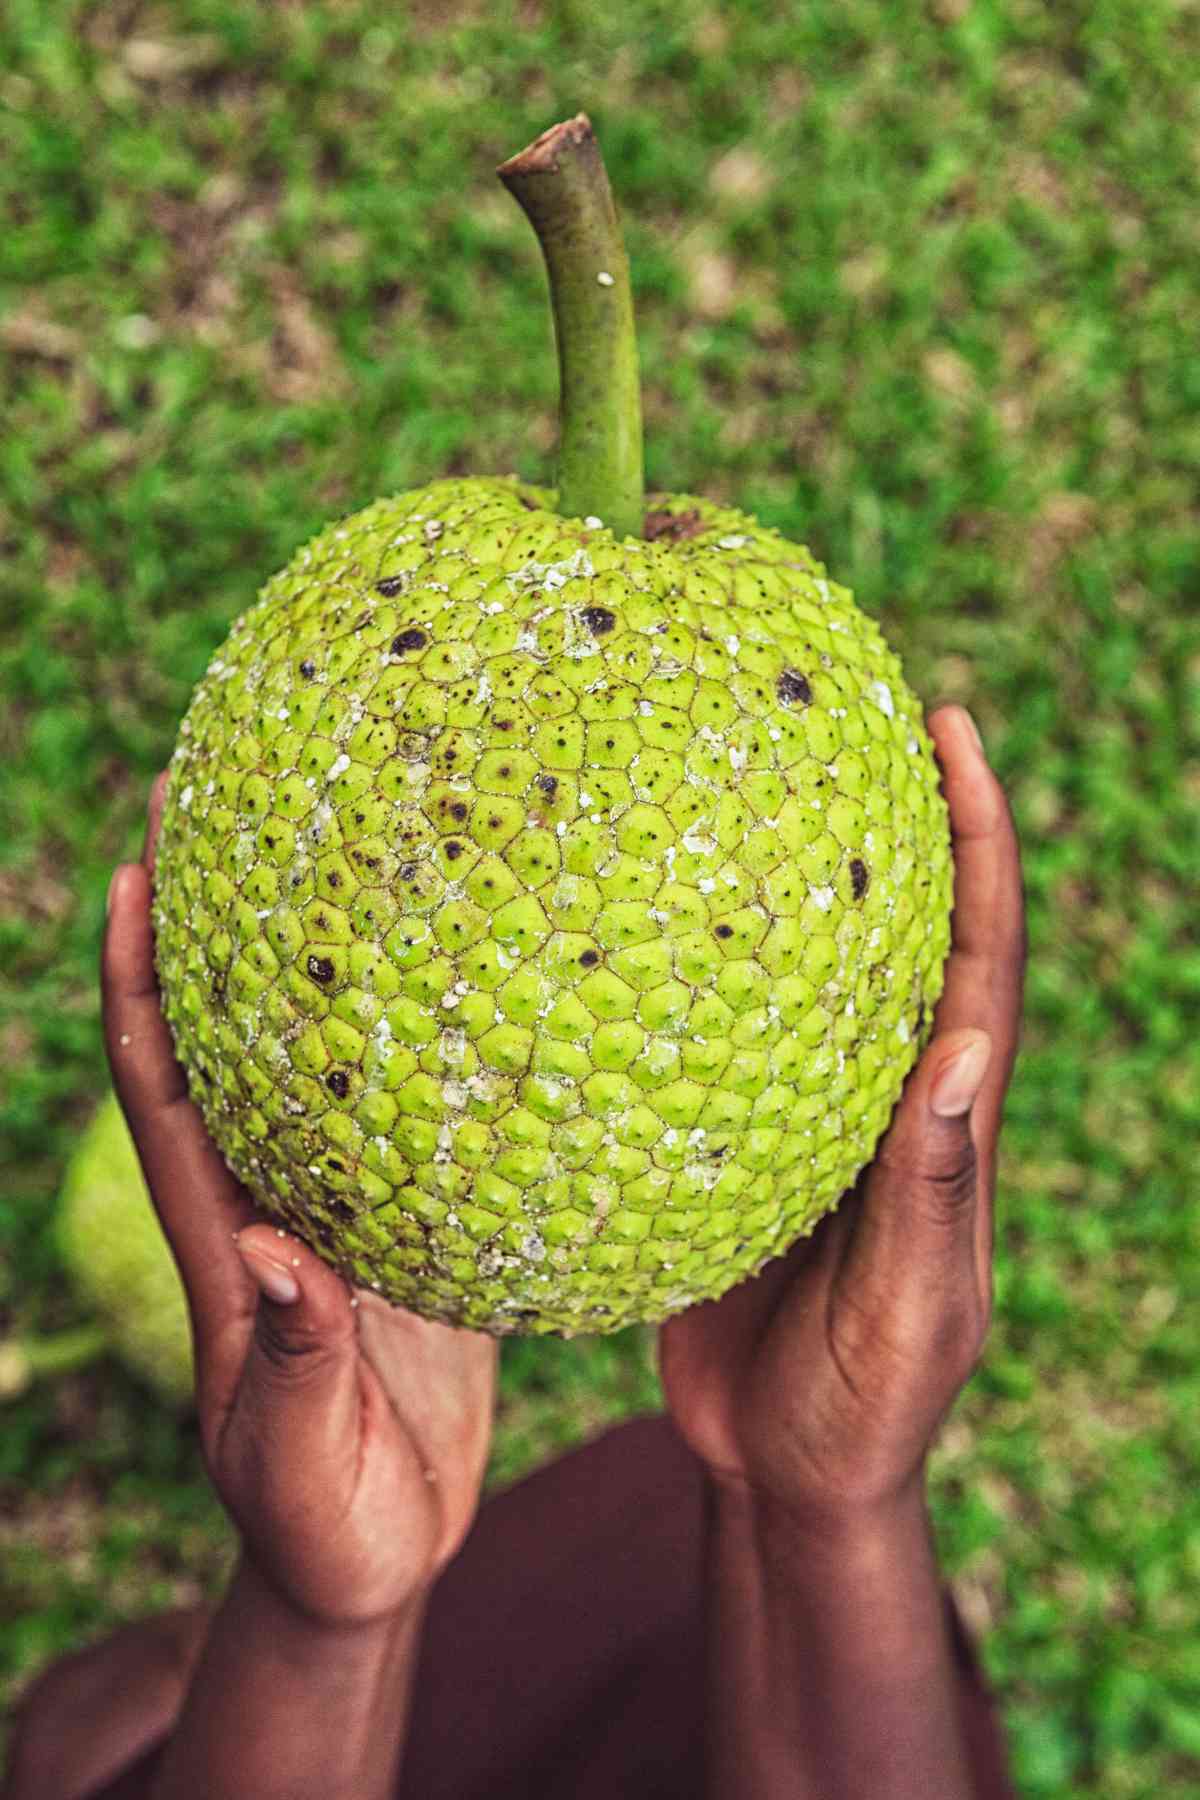 The exotic fruit breadfruit being harvested